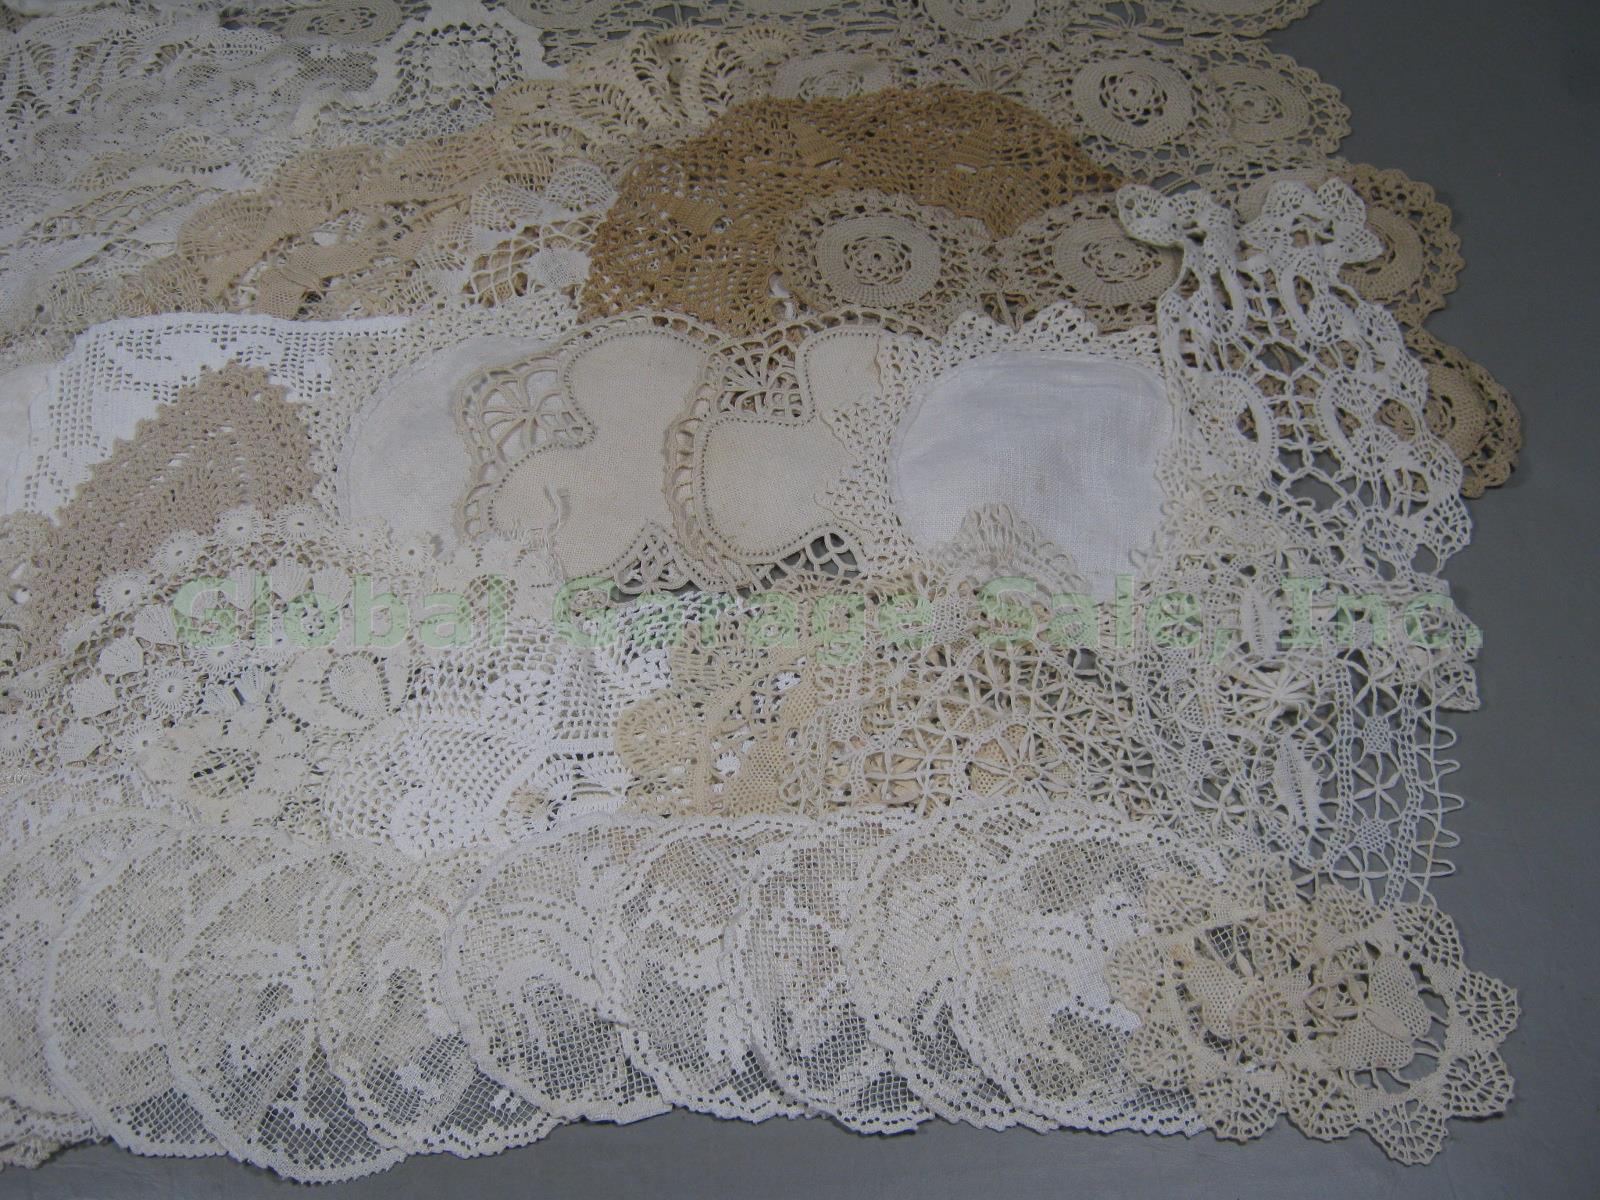 54 Vtg Antique Hand Crochet Lace Doily Arm Cover Hanky Napkin Table Runners Lot 2